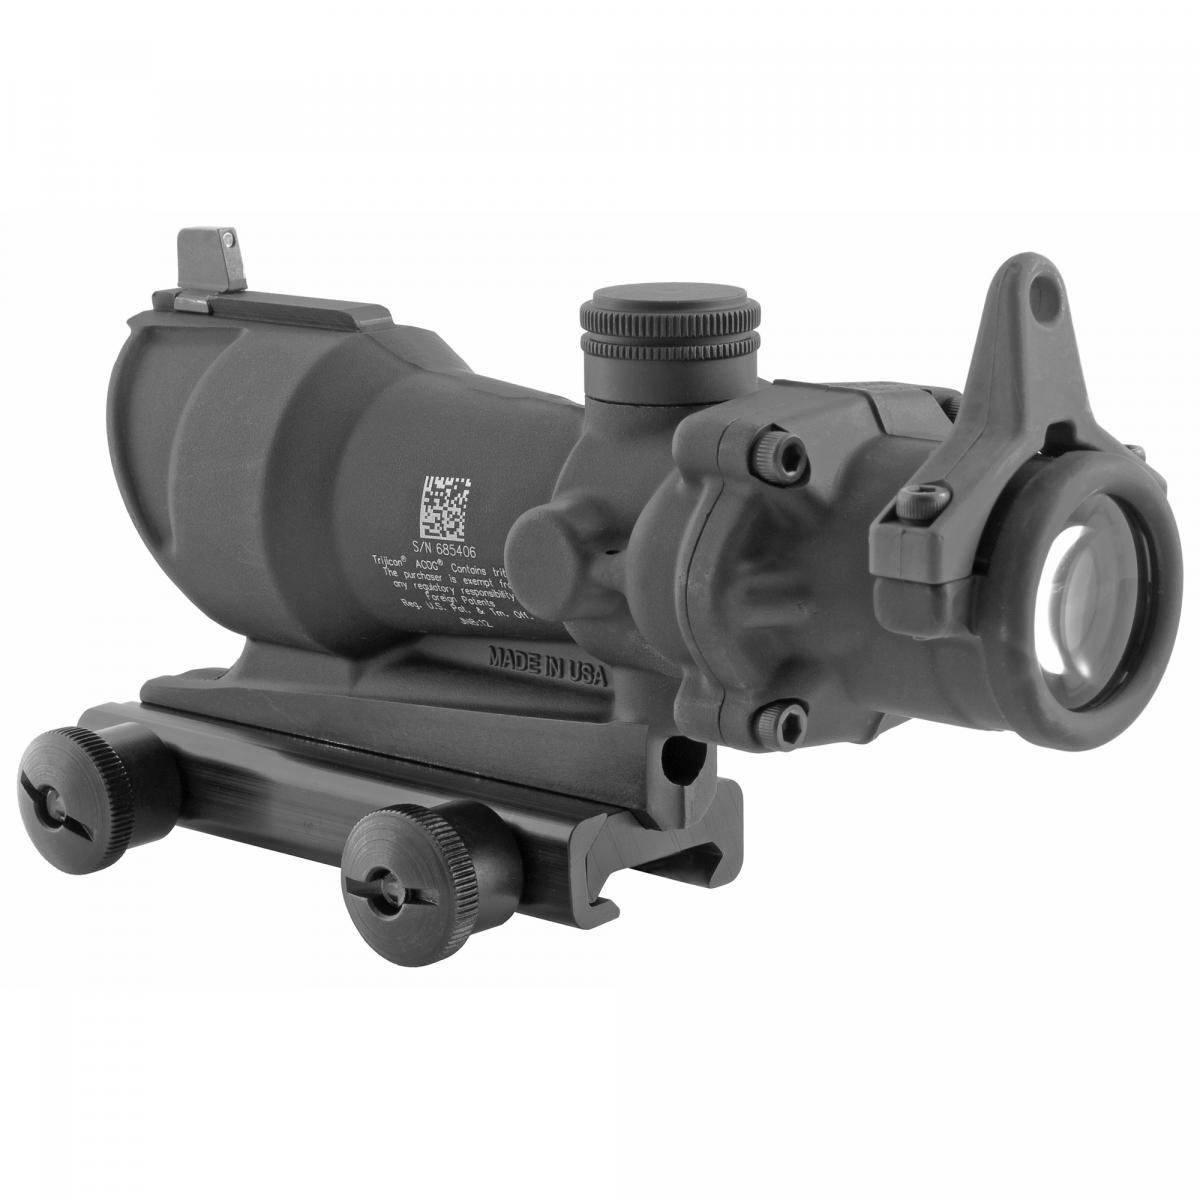 Trijicon ACOG M4A1 w/Flat Top Adapter .308 - 4Shooters